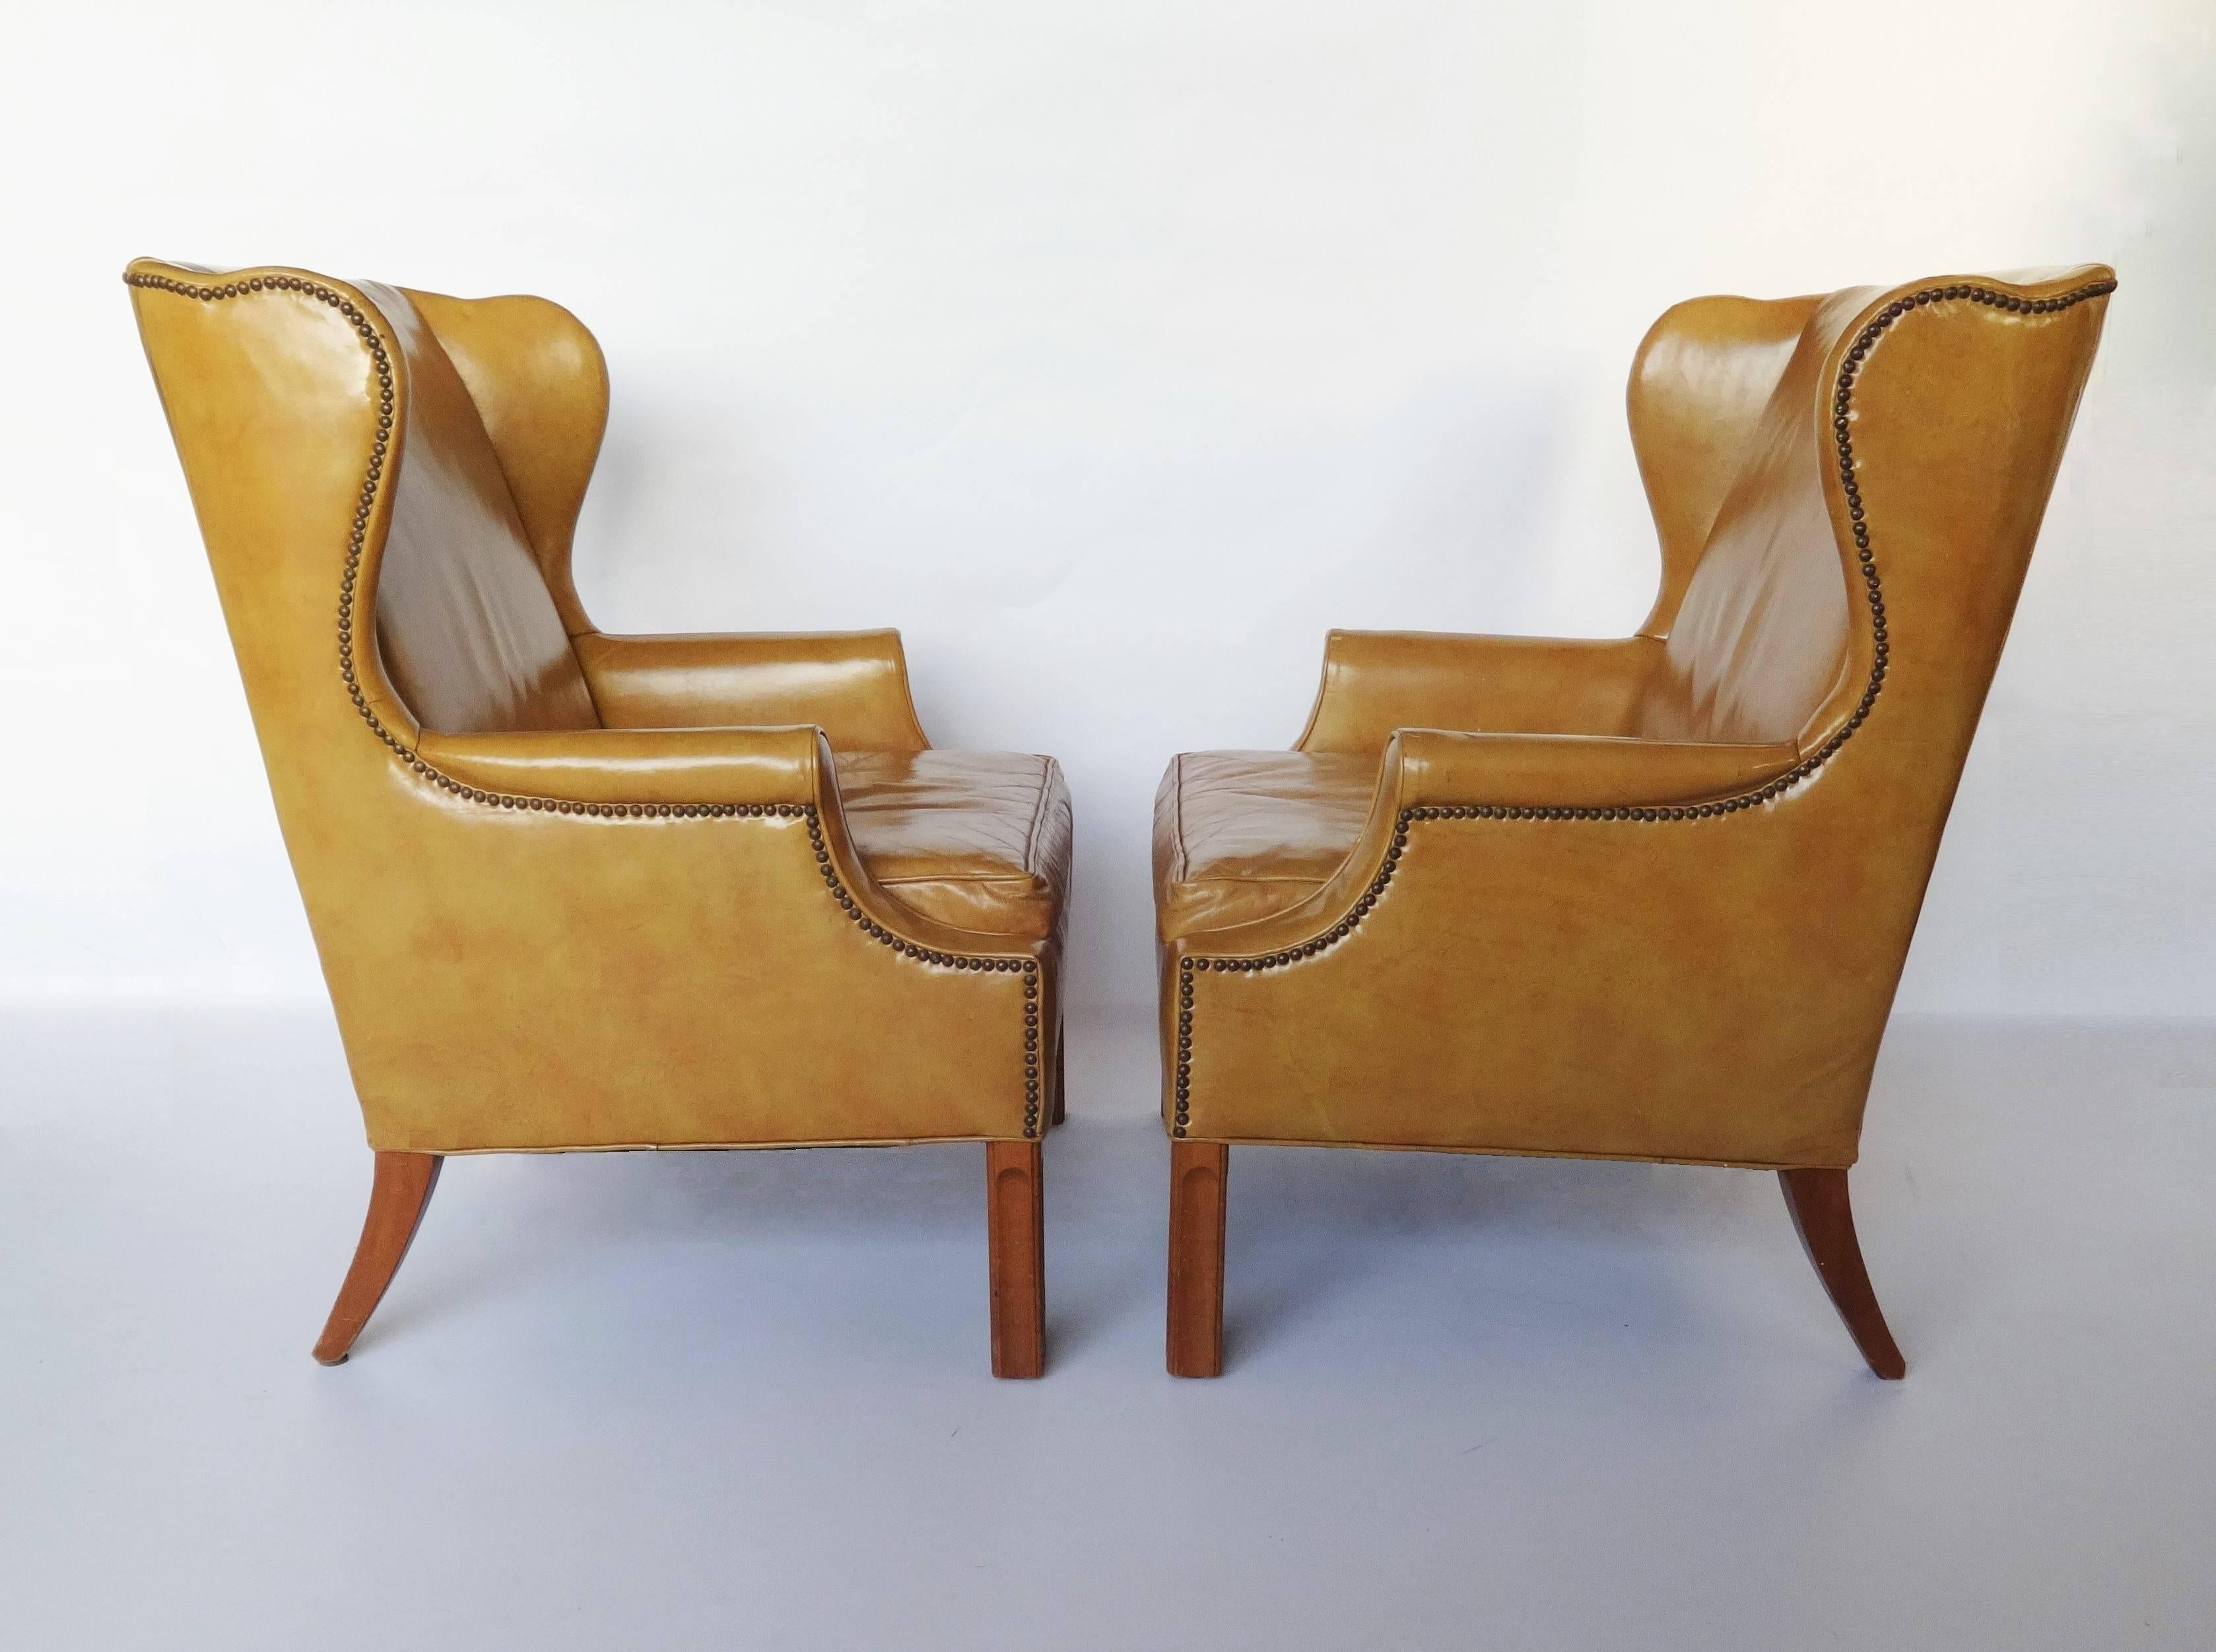 A good George III style pair of light tan leather wing armchairs. With a winged back, rolled arms, close nailed brass studded detail. Raised on square supports united by a H-stretcher. Can be used as is or re-upholstered to liking. Inquire about our